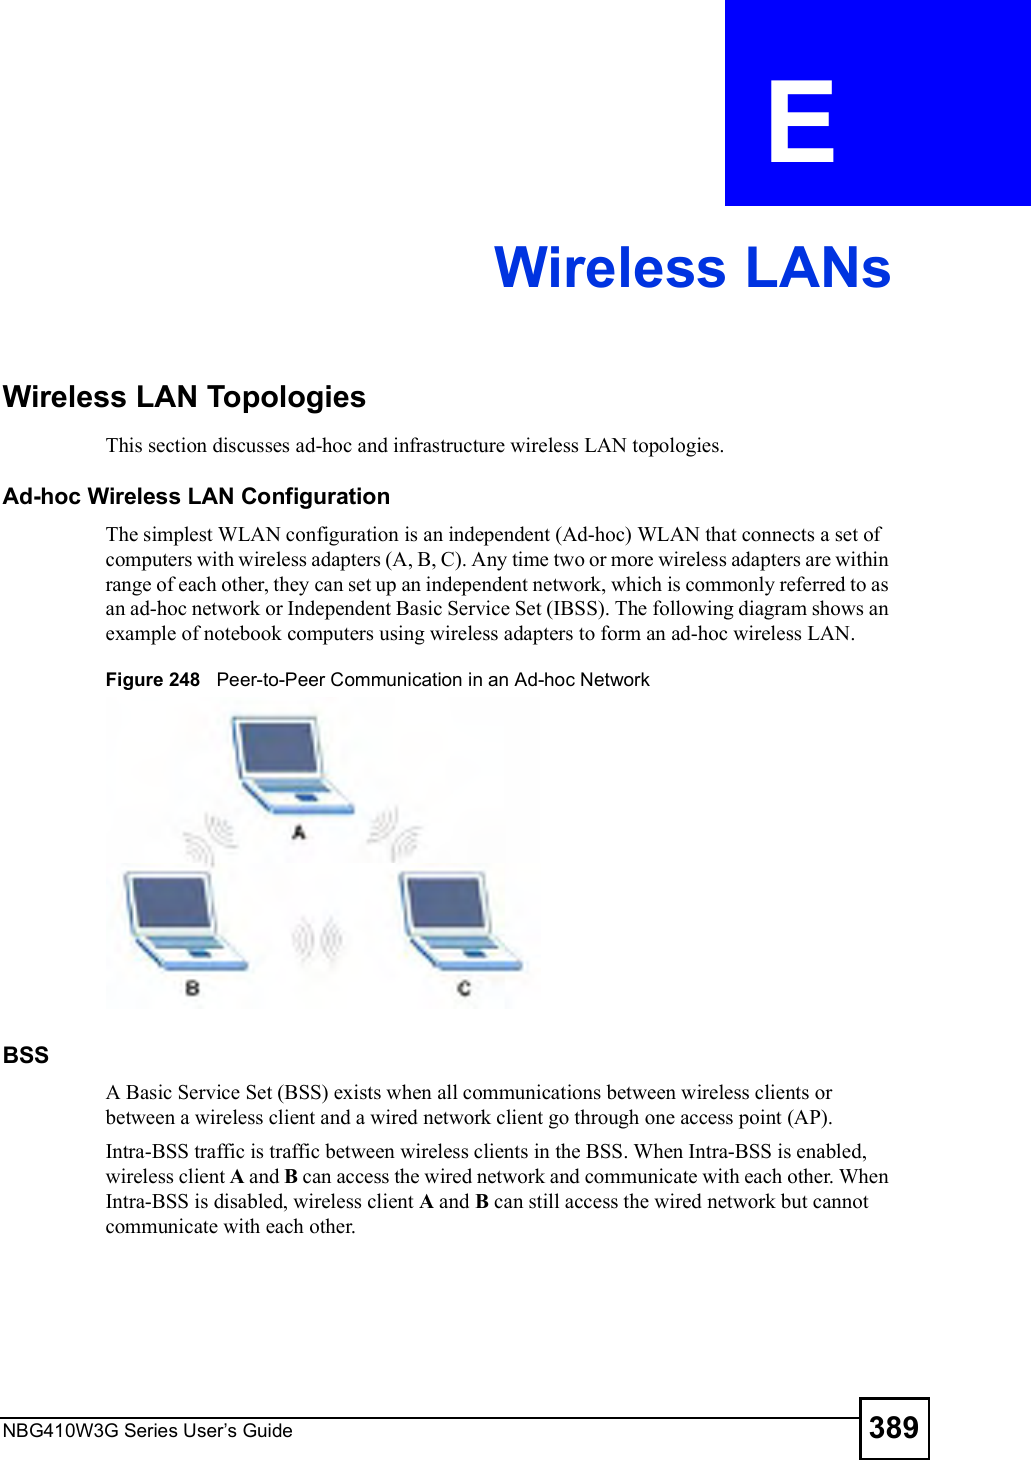 NBG410W3G Series User s Guide 389APPENDIX  E Wireless LANsWireless LAN TopologiesThis section discusses ad-hoc and infrastructure wireless LAN topologies.Ad-hoc Wireless LAN ConfigurationThe simplest WLAN configuration is an independent (Ad-hoc) WLAN that connects a set of computers with wireless adapters (A, B, C). Any time two or more wireless adapters are within range of each other, they can set up an independent network, which is commonly referred to as an ad-hoc network or Independent Basic Service Set (IBSS). The following diagram shows an example of notebook computers using wireless adapters to form an ad-hoc wireless LAN. Figure 248   Peer-to-Peer Communication in an Ad-hoc NetworkBSSA Basic Service Set (BSS) exists when all communications between wireless clients or between a wireless client and a wired network client go through one access point (AP). Intra-BSS traffic is traffic between wireless clients in the BSS. When Intra-BSS is enabled, wireless client A and B can access the wired network and communicate with each other. When Intra-BSS is disabled, wireless client A and B can still access the wired network but cannot communicate with each other.